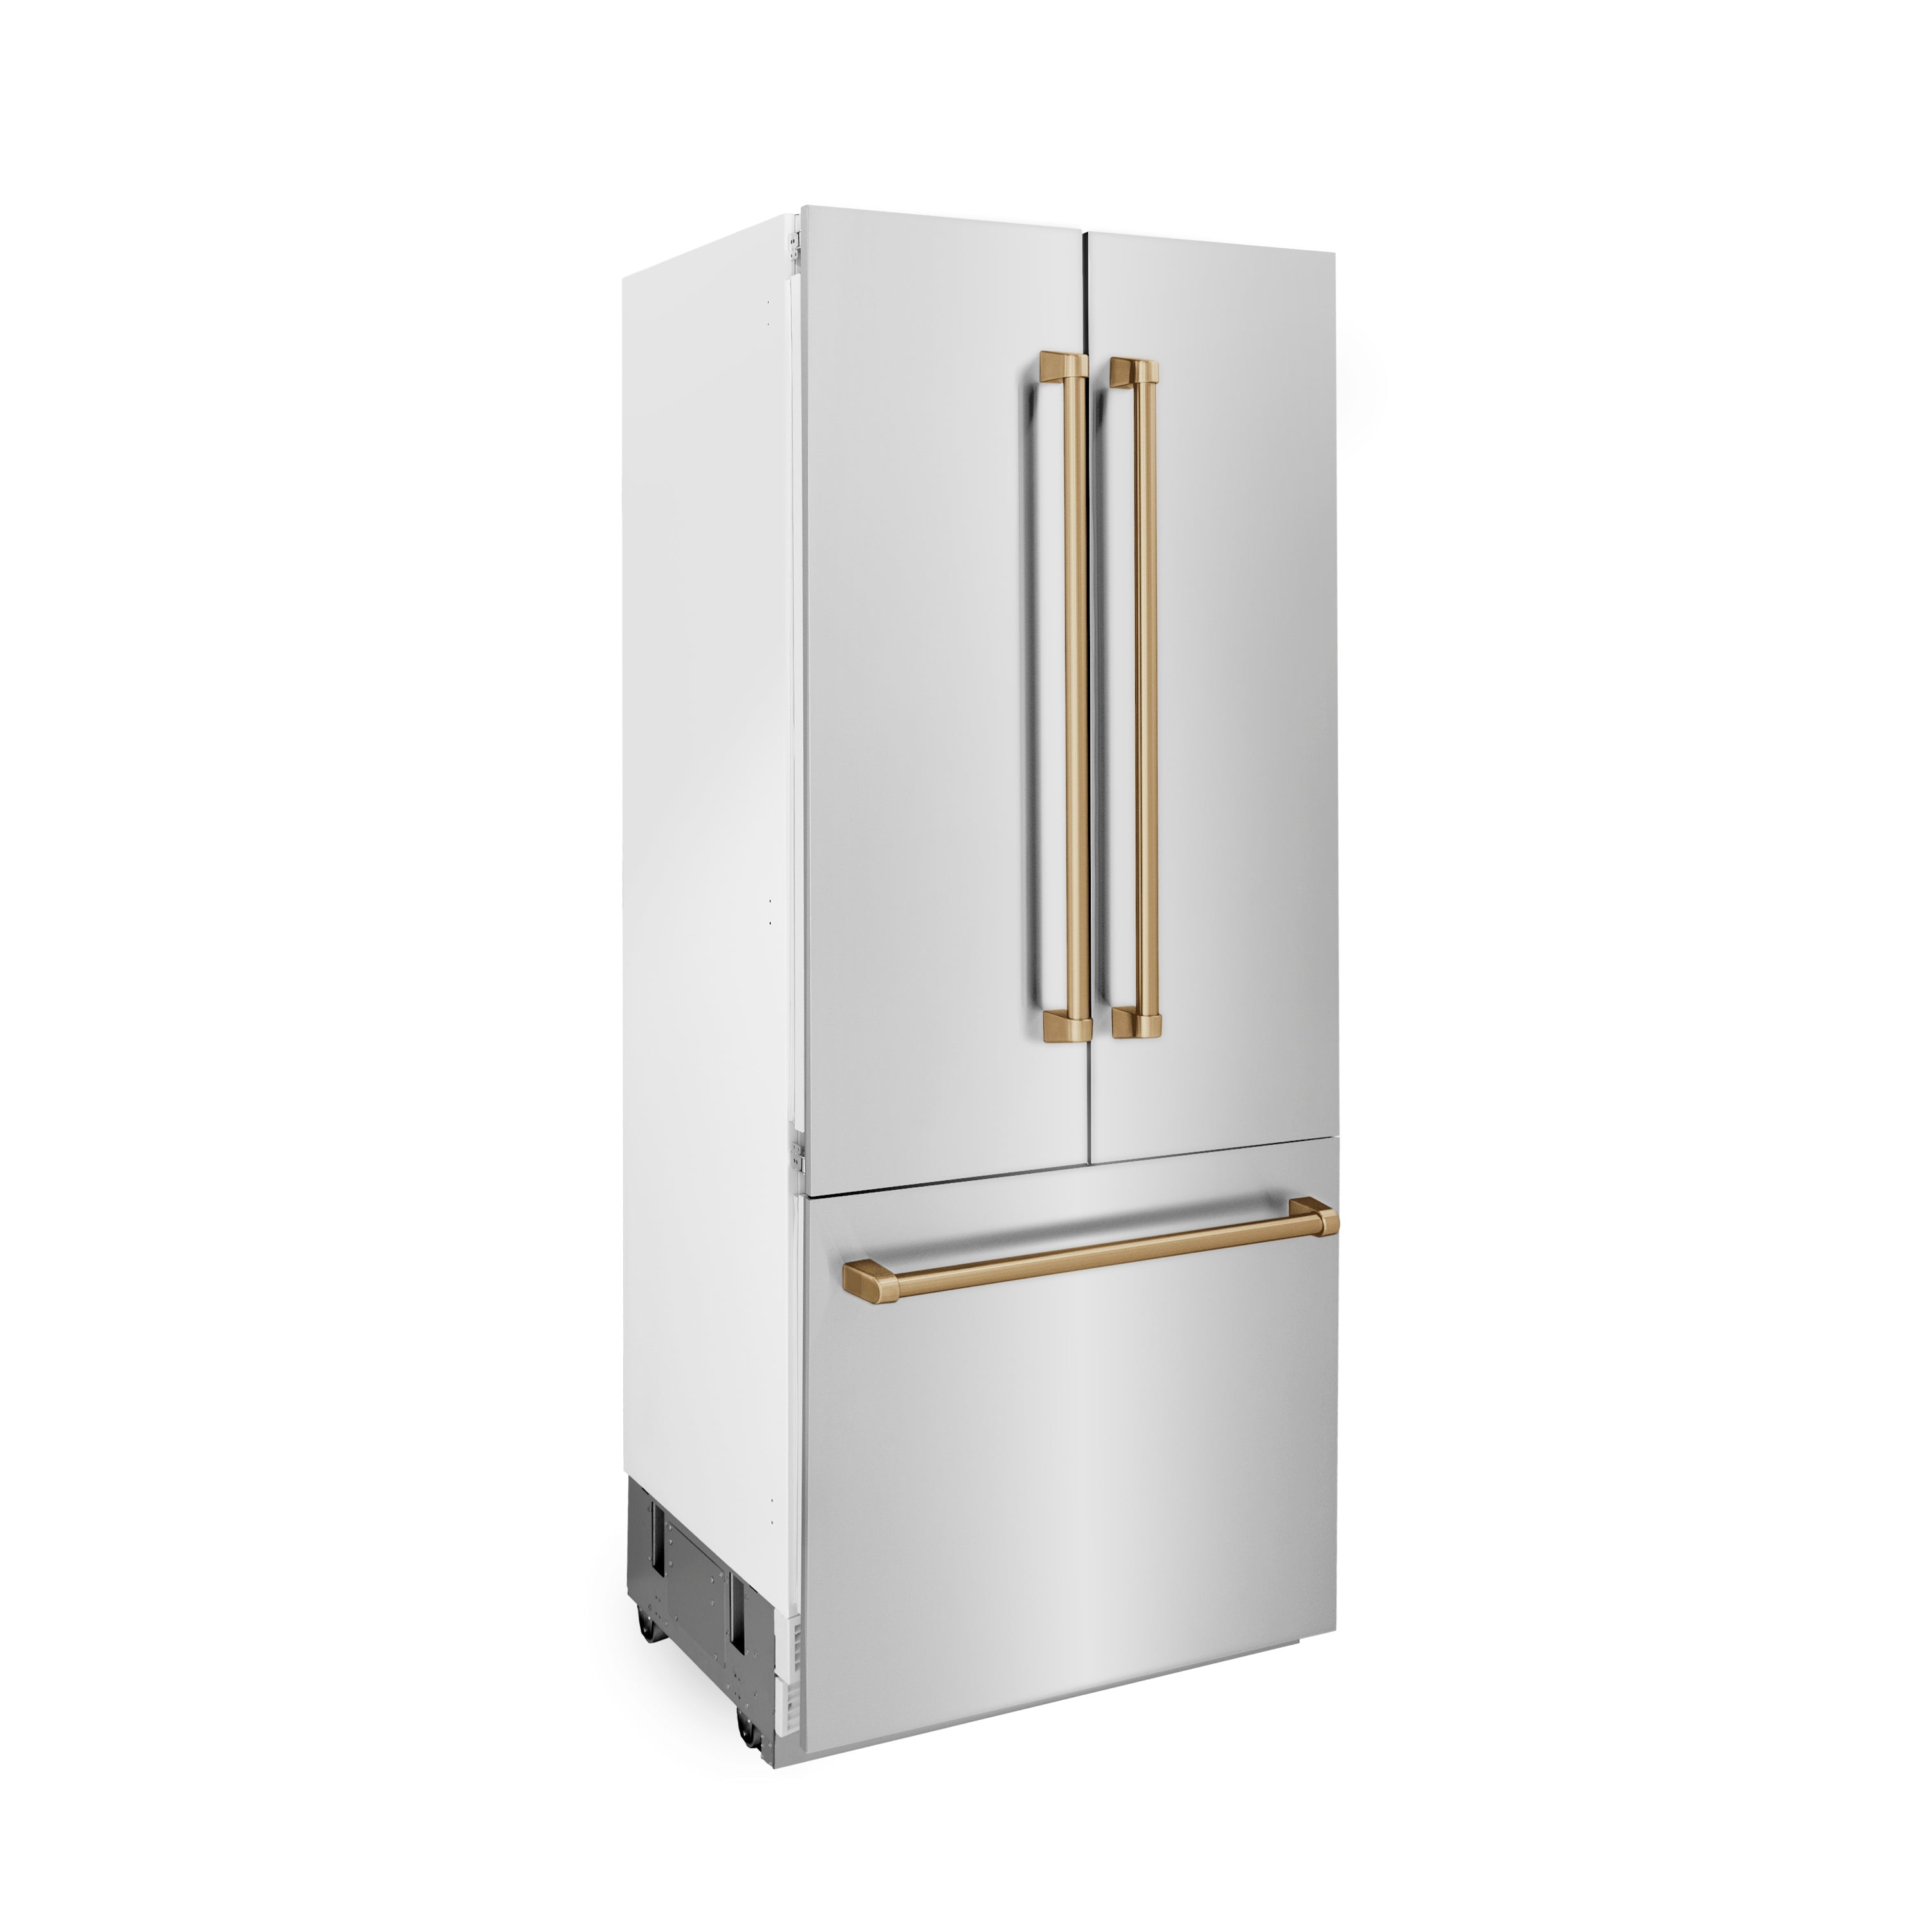 ZLINE 36" Autograph Edition 19.6 cu. ft. Built-in 2-Door Bottom Freezer Refrigerator with Internal Water and Ice Dispenser in Stainless Steel with Champagne Bronze Accents (RBIVZ-304-36-CB) - New Star Living